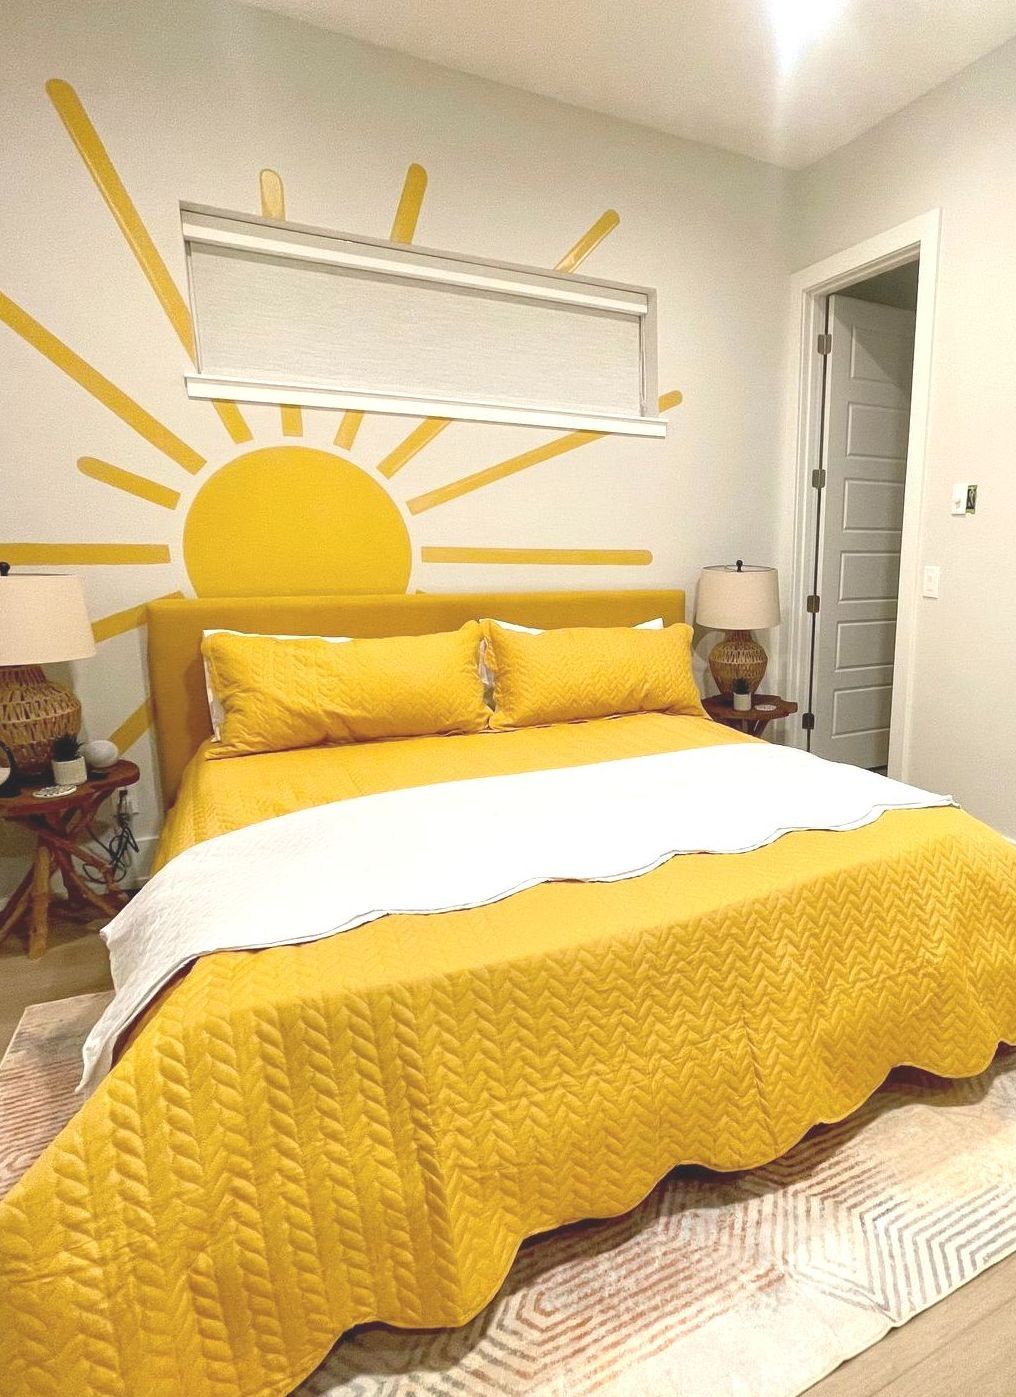 Sunrise and sunset accent wall behind a king size bed at the Waterway Stay Short term rental/Airbnb, Palm Coast, Florida.